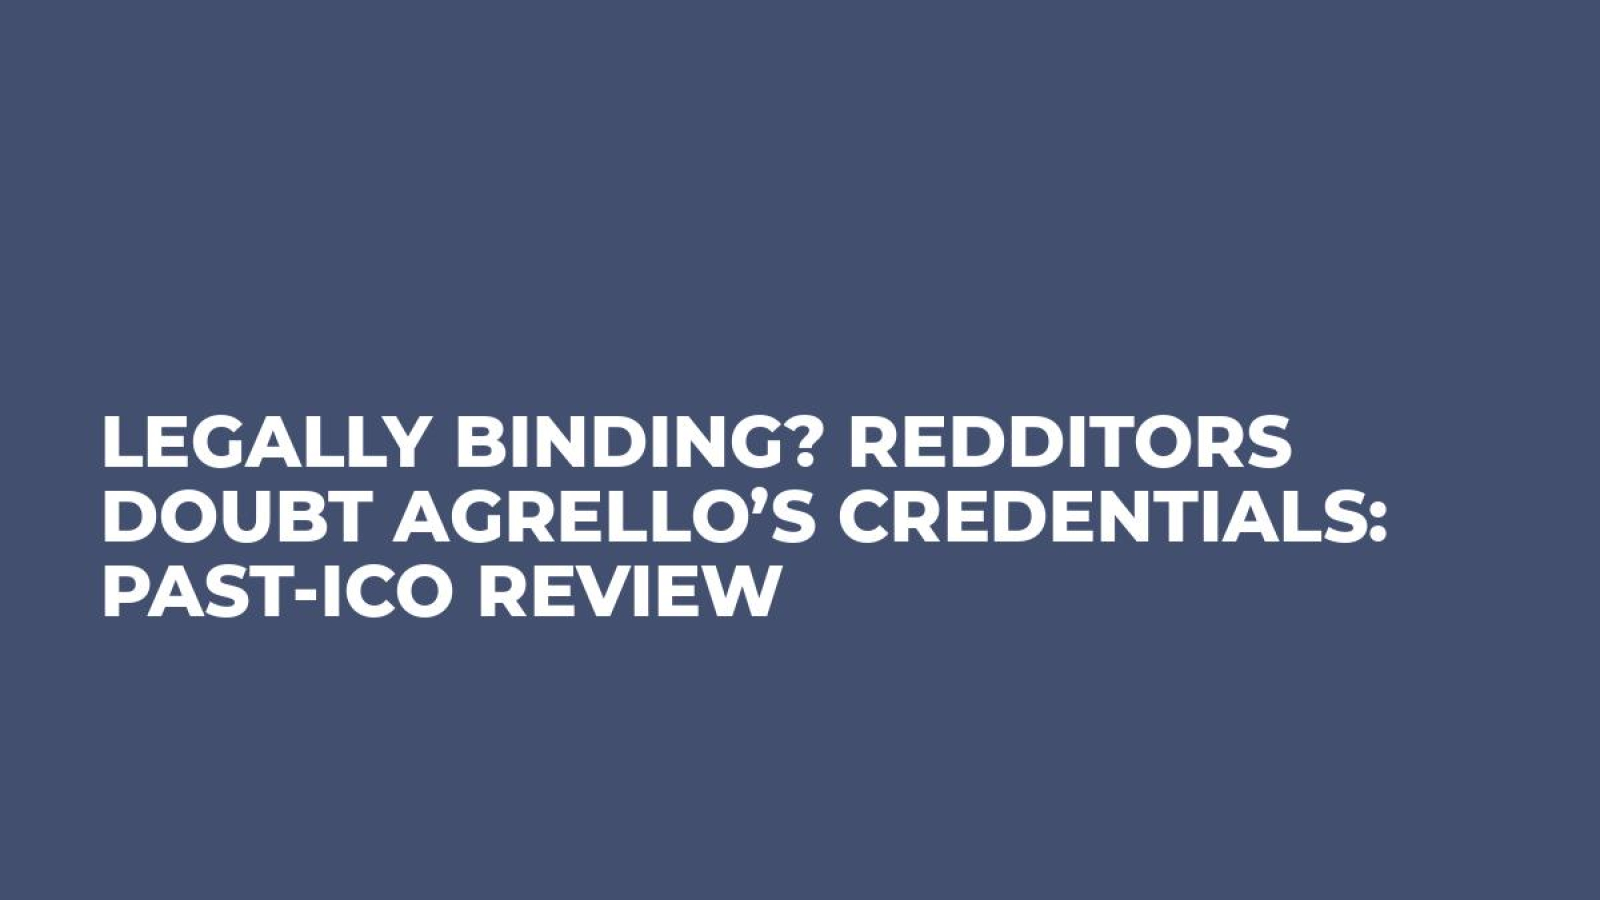 Legally Binding? Redditors Doubt Agrello’s Credentials: Past-ICO Review